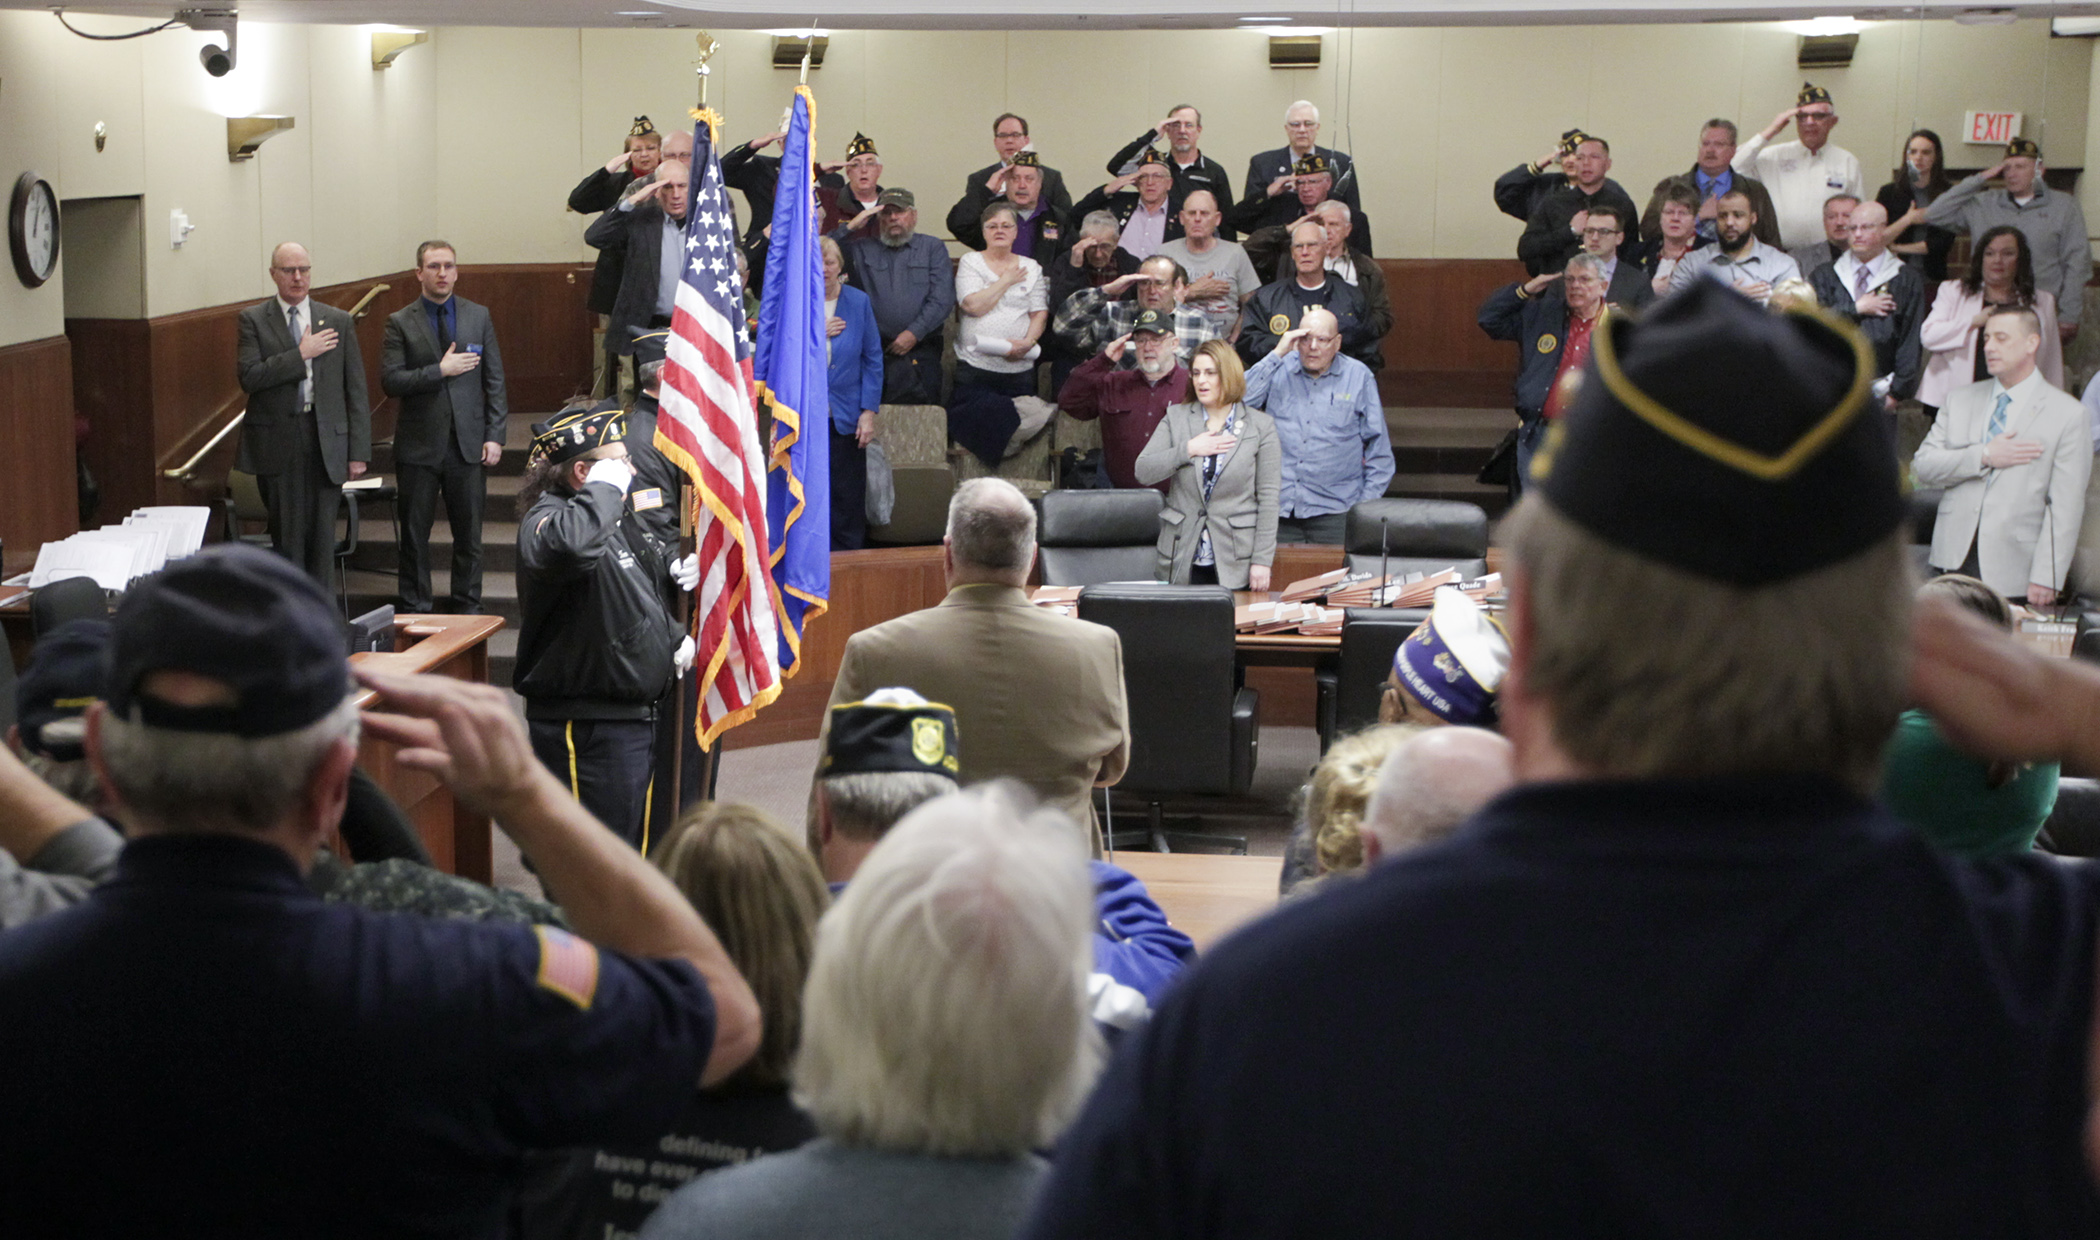 A color guard from the Waite Park American Legion Silver Star Post 428 presented the colors for the Pledge of Allegiance before the House Veterans Affairs Division meeting March 12 in conjunction with Veterans Day on the Hill. Photo by Paul Battaglia